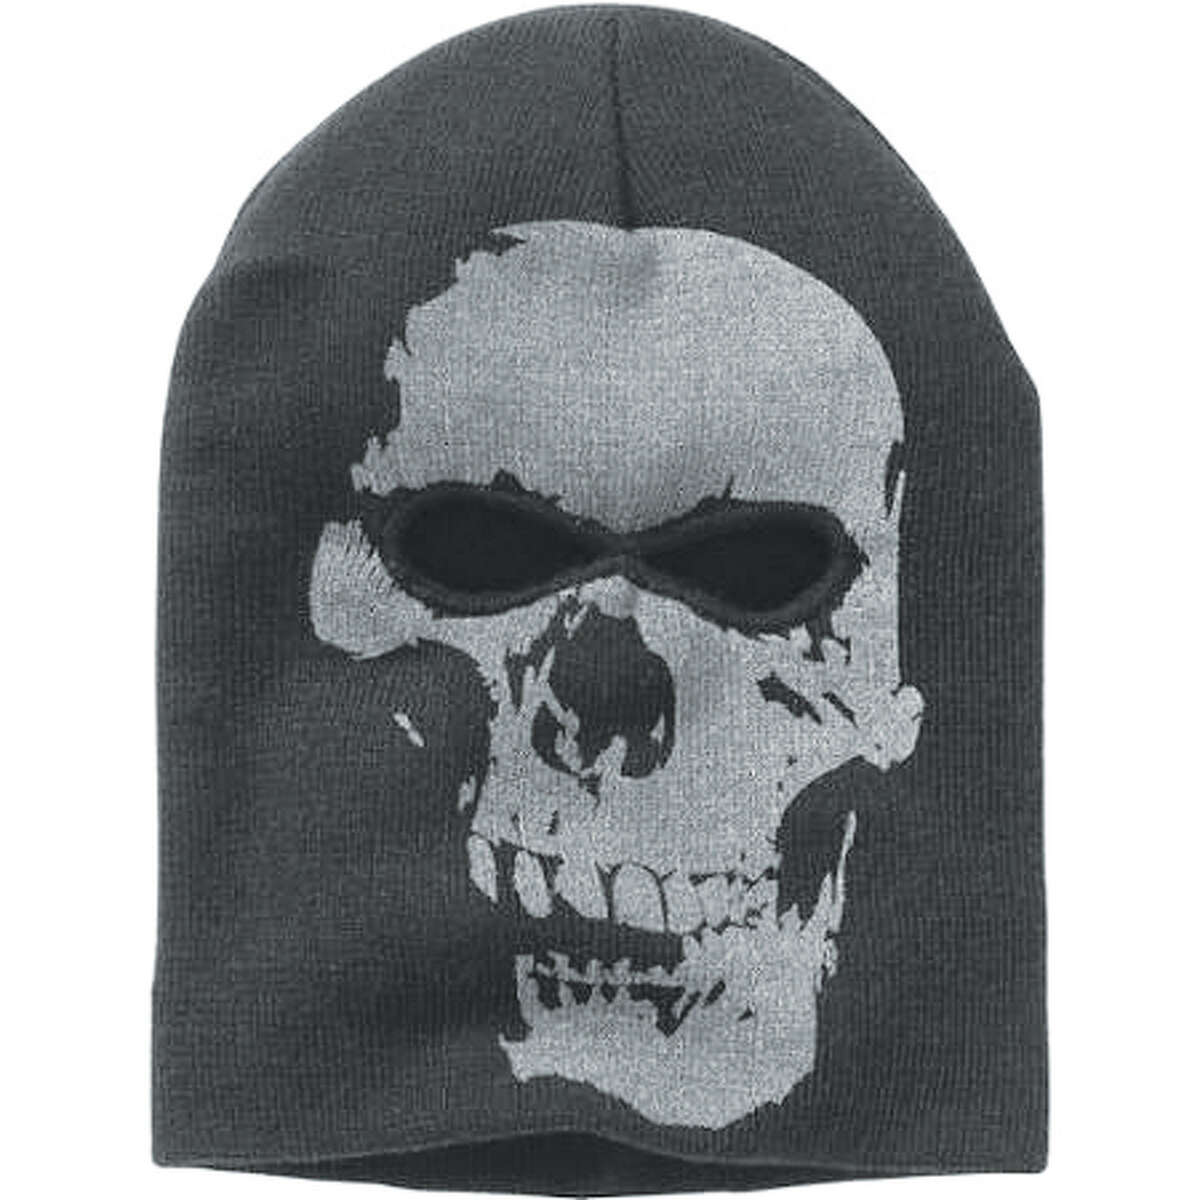 Macoupin County Sheriff Shawn Kahl says the suspect in the 2015 murder of a Woodburn man wore a skull-style ski mask similar to the one pictured here.